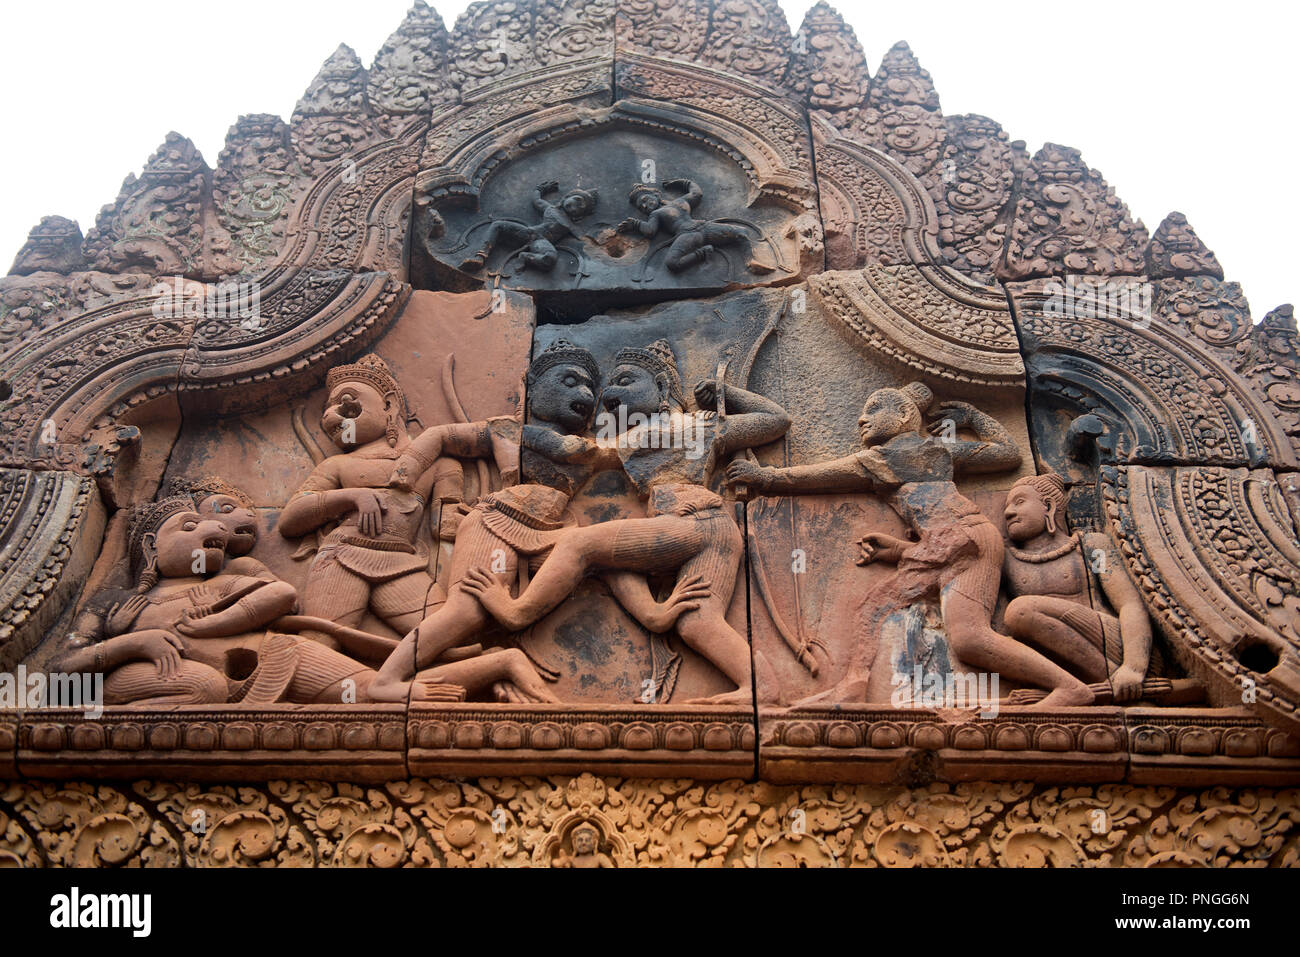 Cambodia, Siem Raep, Angkor, Detail of complicated carvings on red sandstone, Banteay Srei Temple Stock Photo